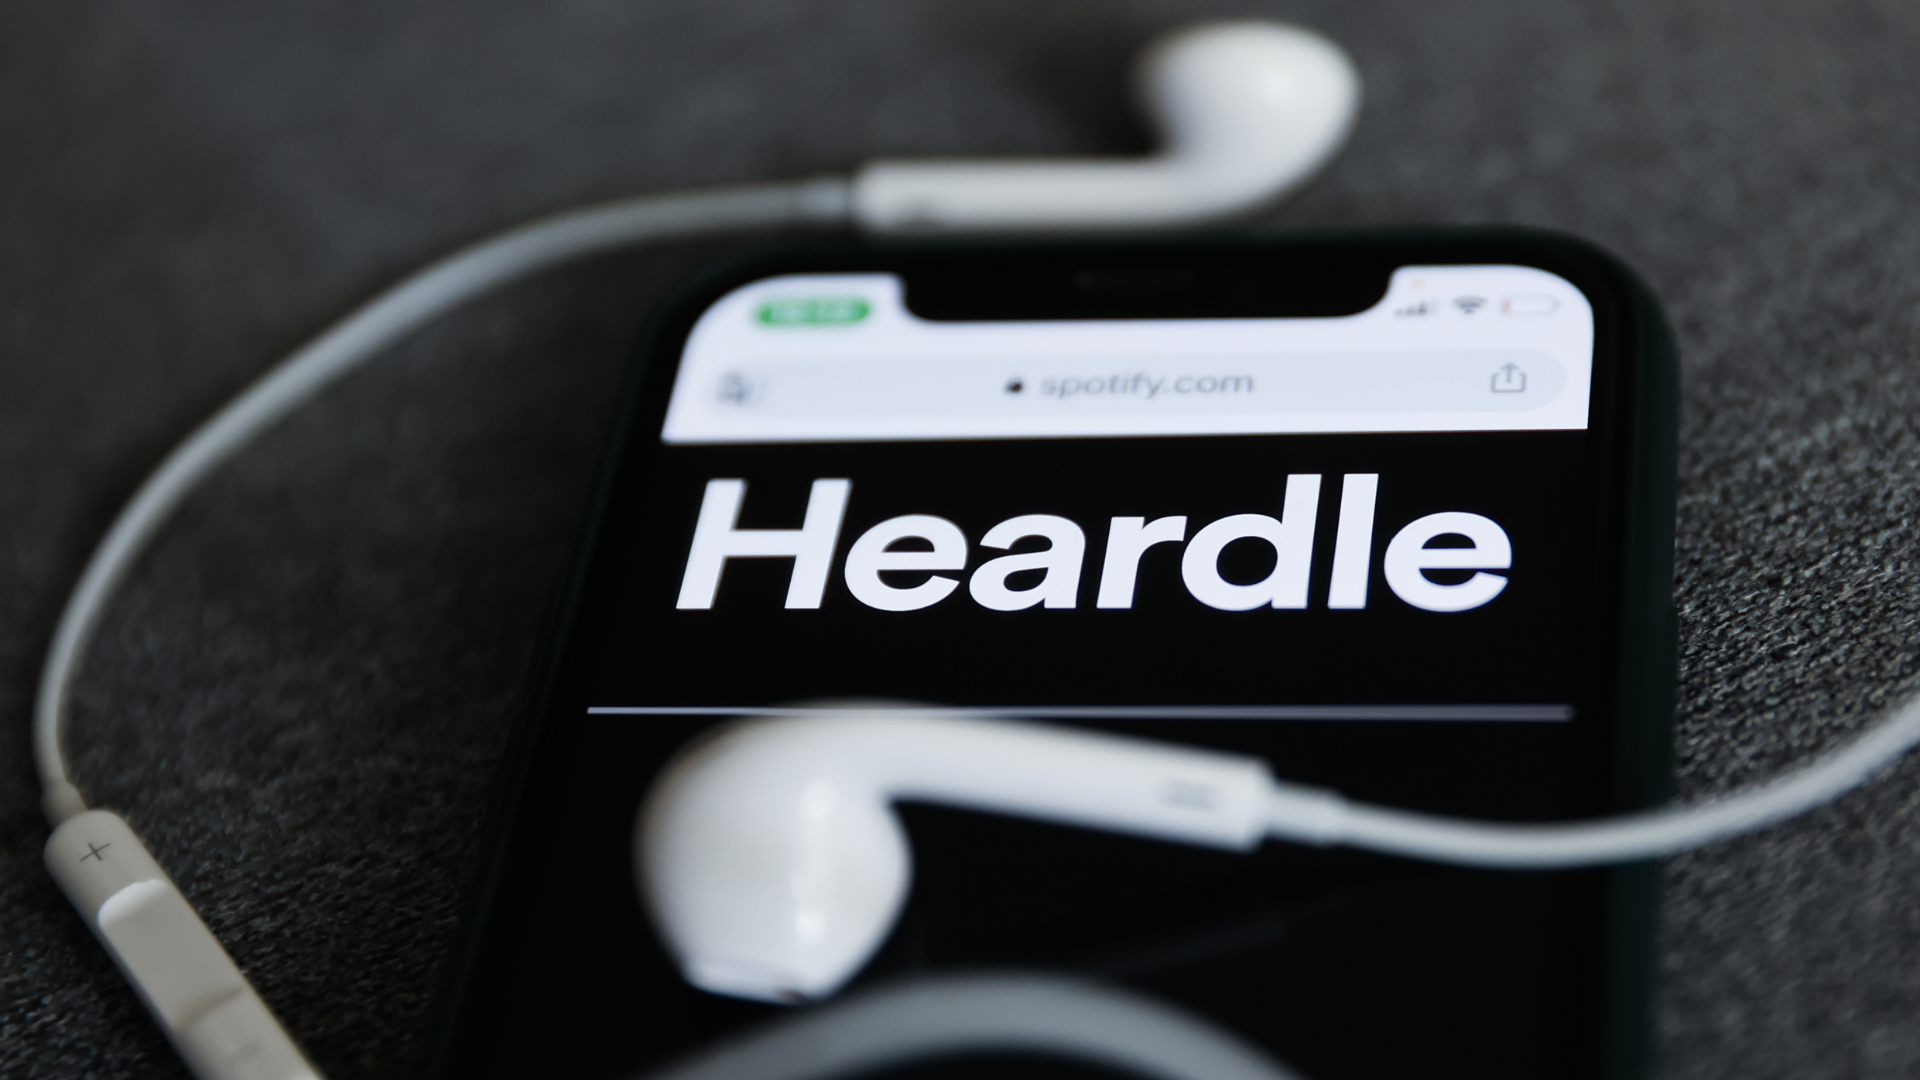 Effect of Heardle: How the Heardle Music App Impacts Music